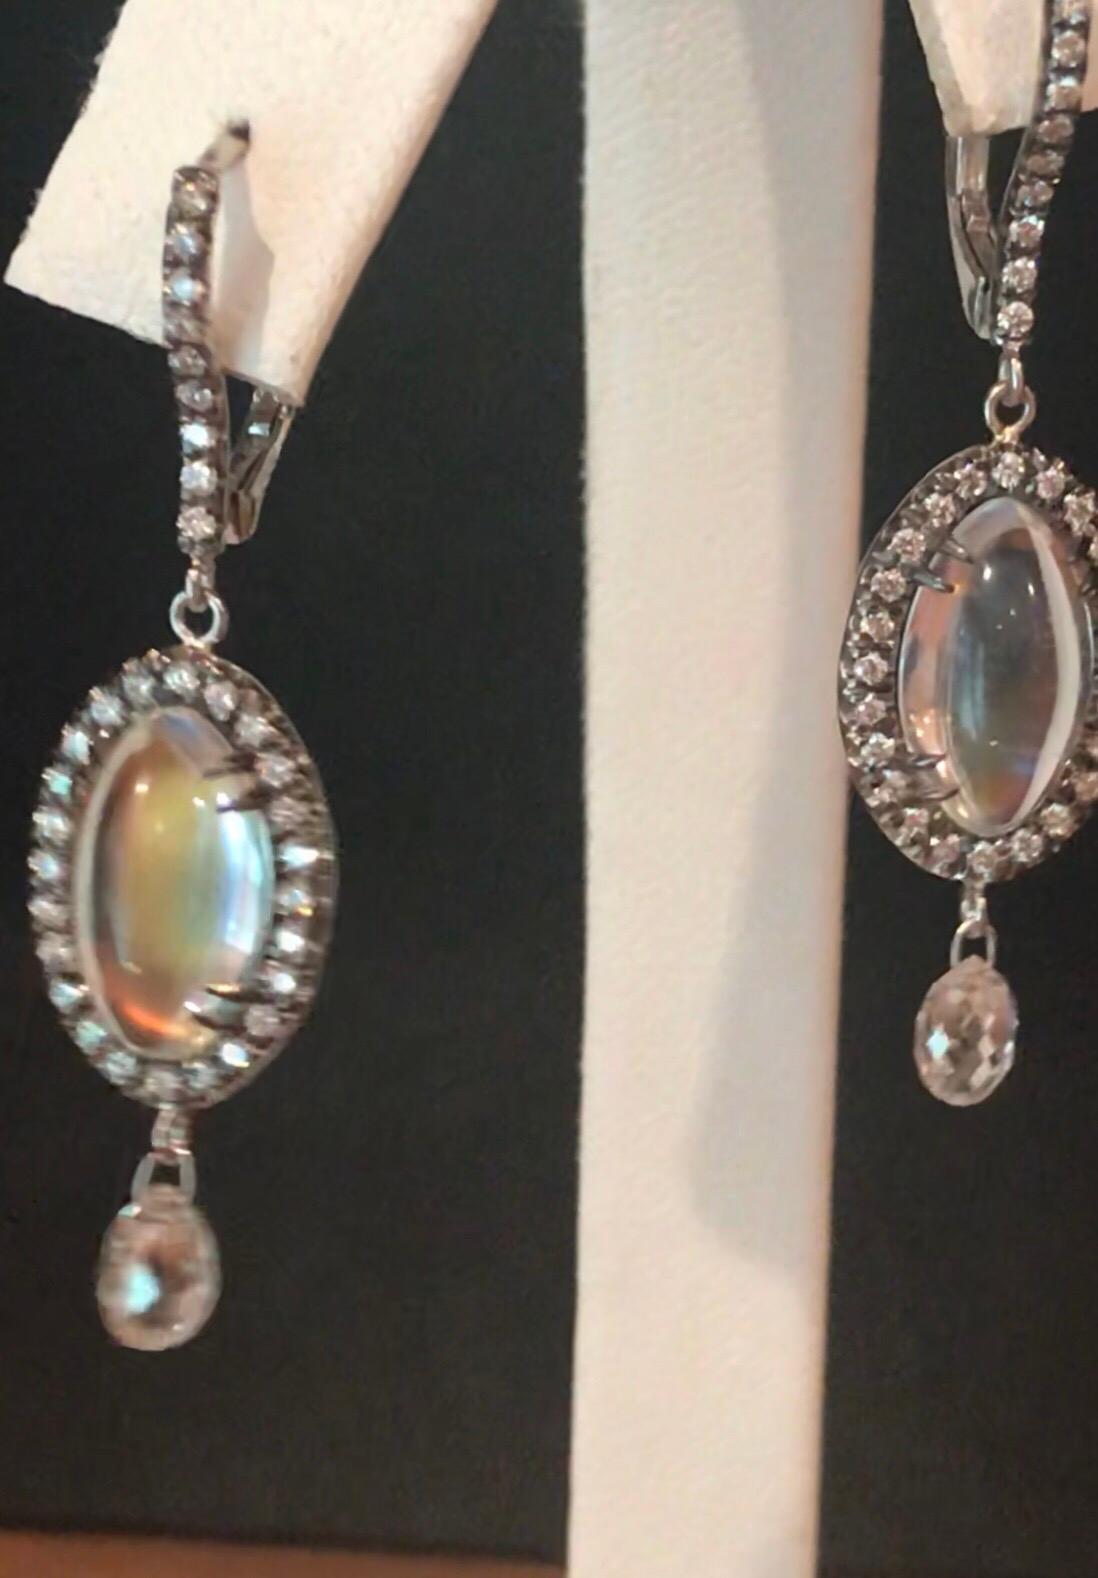 Marquise Cut Bella Campbell/Campbellian Rainbow Moonstone Earrings with Diamond Briolette